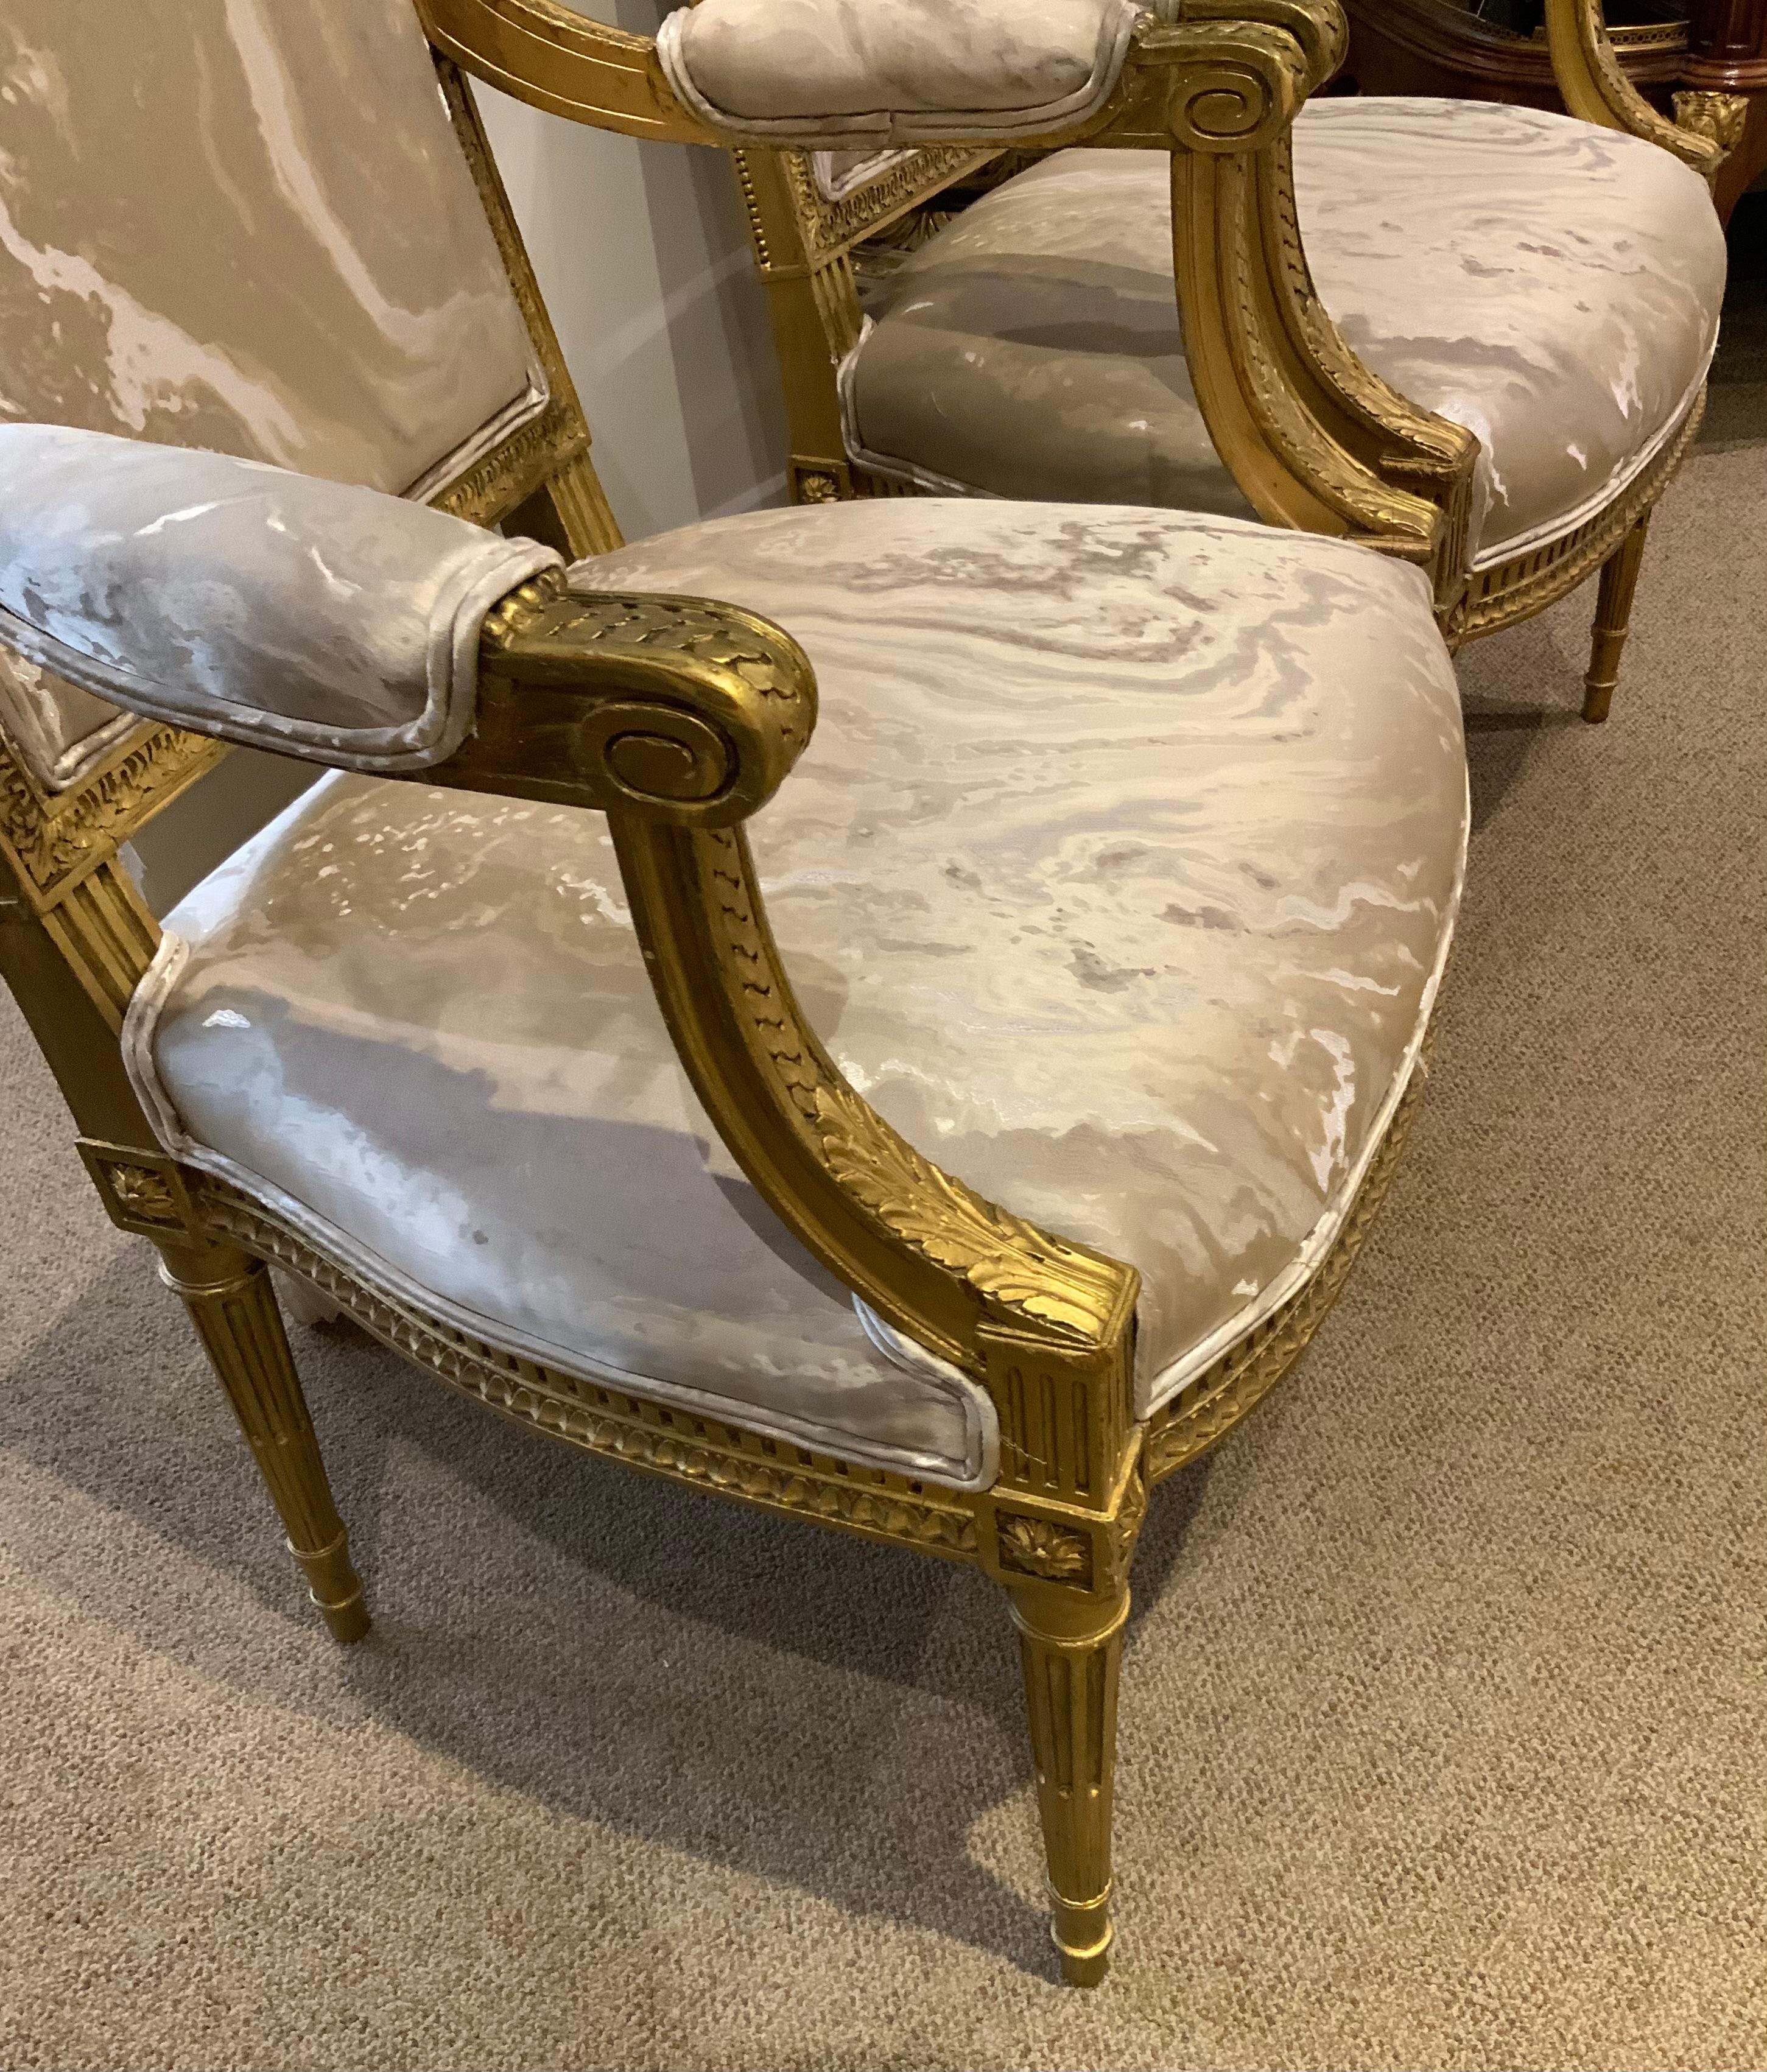 Fine giltwood hand carving makes these chairs exceptionally fine.
The gilding is original with a soft patina. The legs are reeded and
A circular pendant design is set on the corners. The squared 
Back is a sophisticated design that works well with